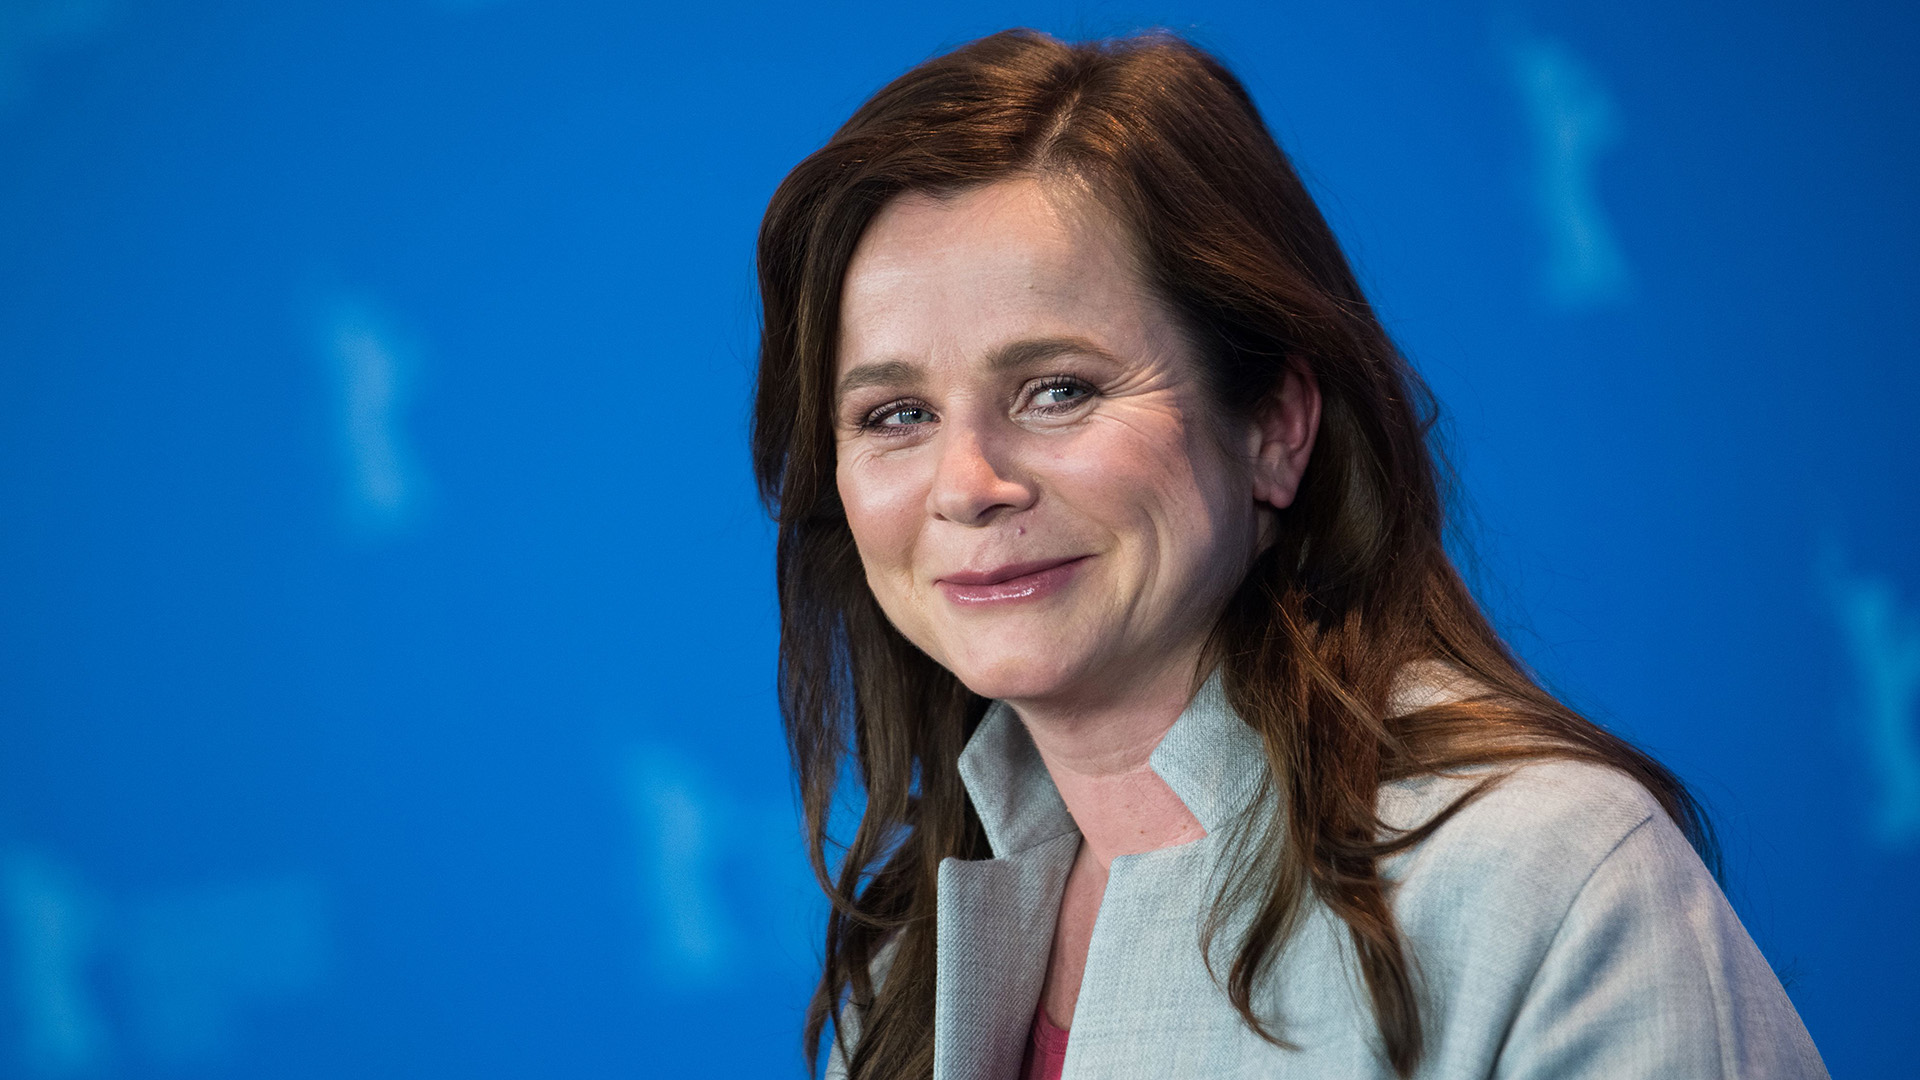 Where to Find Emily Watson: From ‘Angela’s Ashes’ to AMC+’s ‘Too Close’